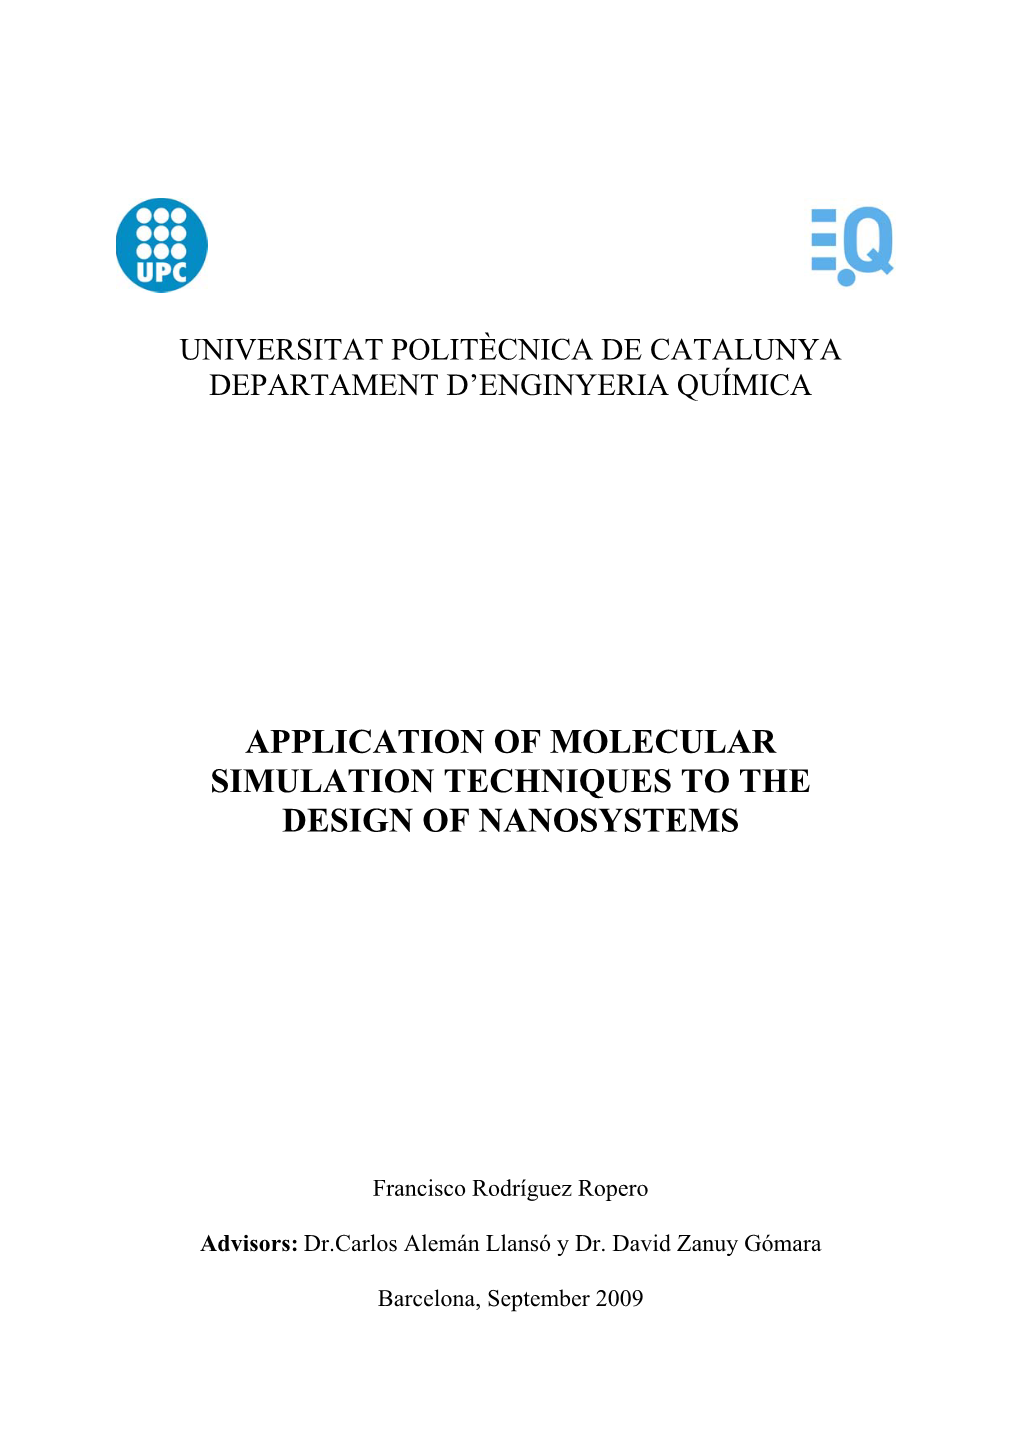 Application of Molecular Simulation Techniques to the Design of Nanosystems